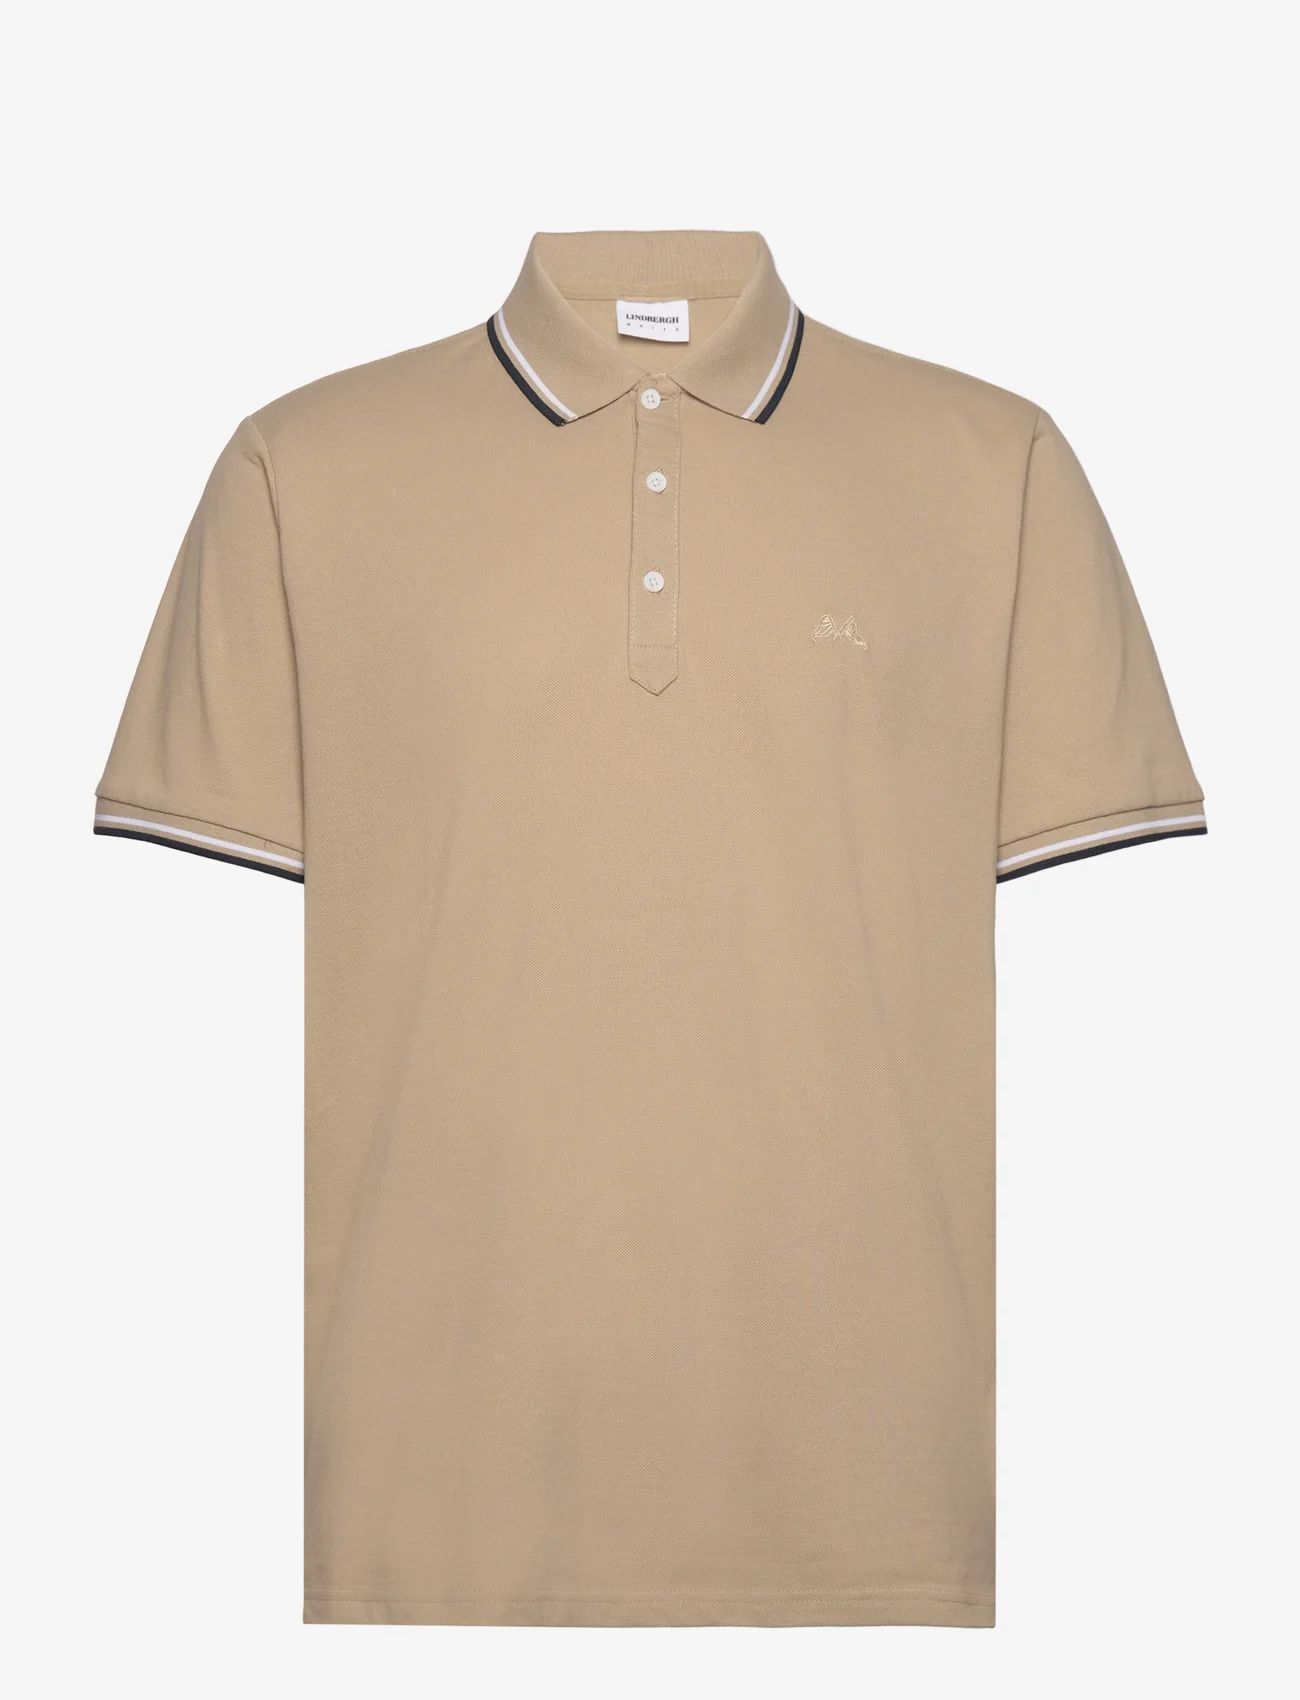 Lindbergh - Polo shirt with contrast piping - alhaisimmat hinnat - stone - 0